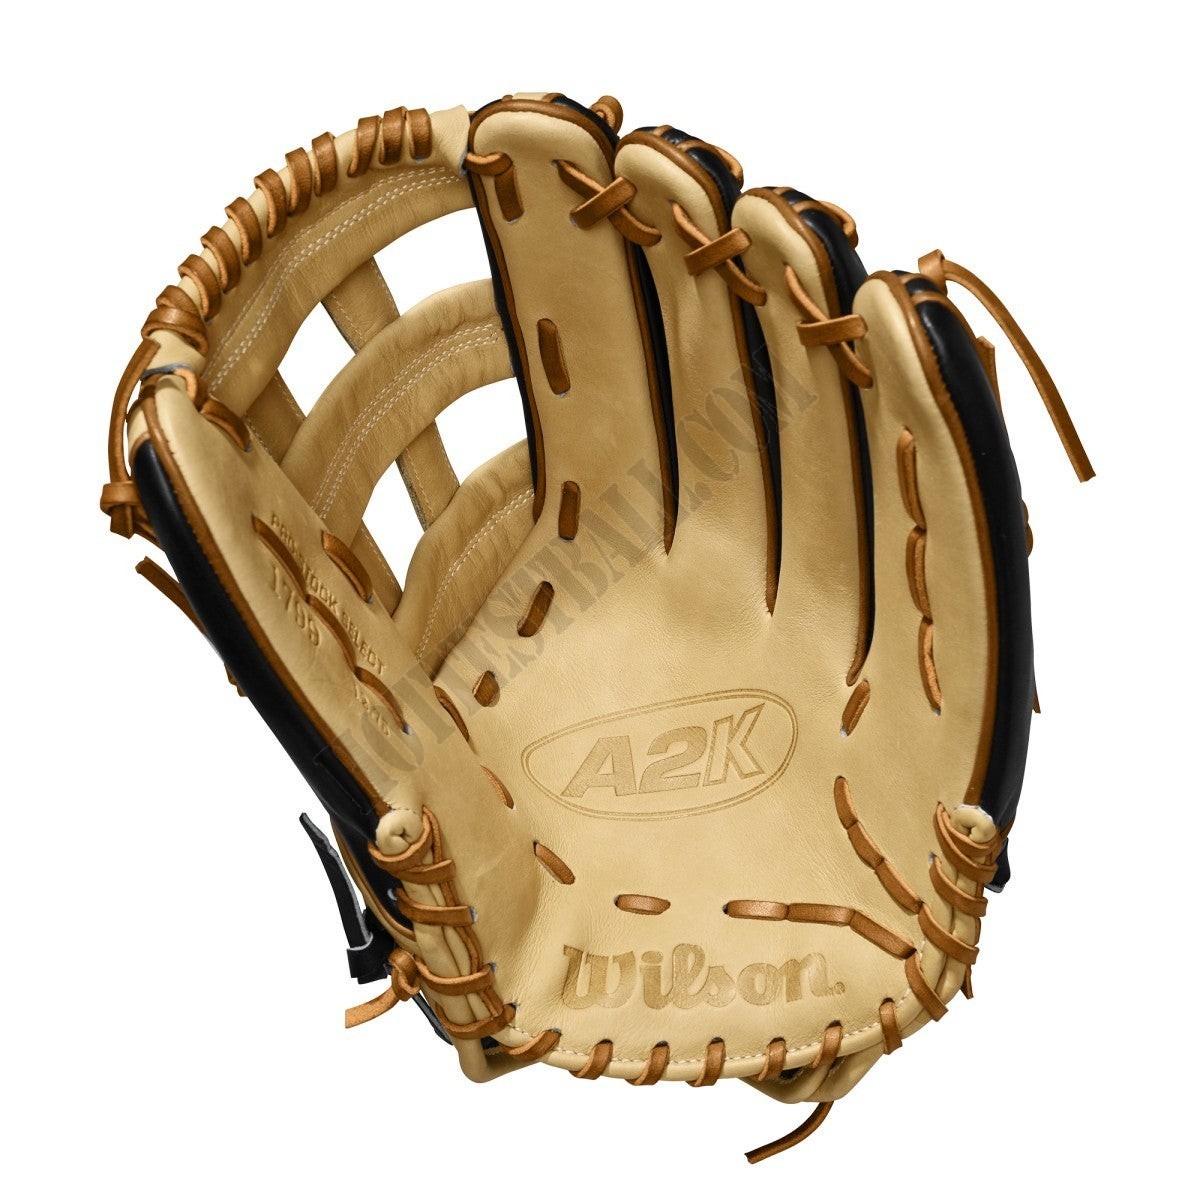 2020 A2K 1799 12.75" Outfield Baseball Glove ● Wilson Promotions - -2